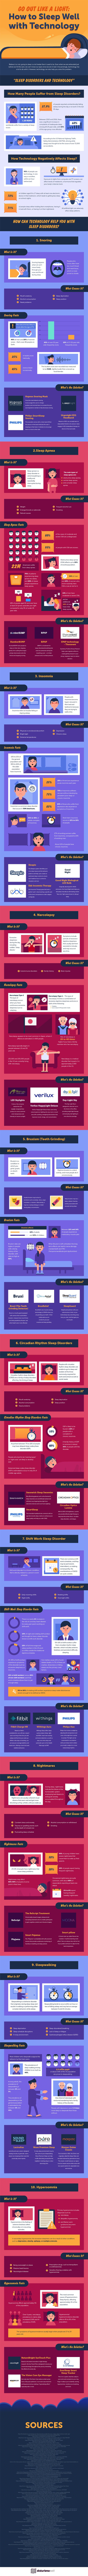 infographic-sleep-well-with-technology